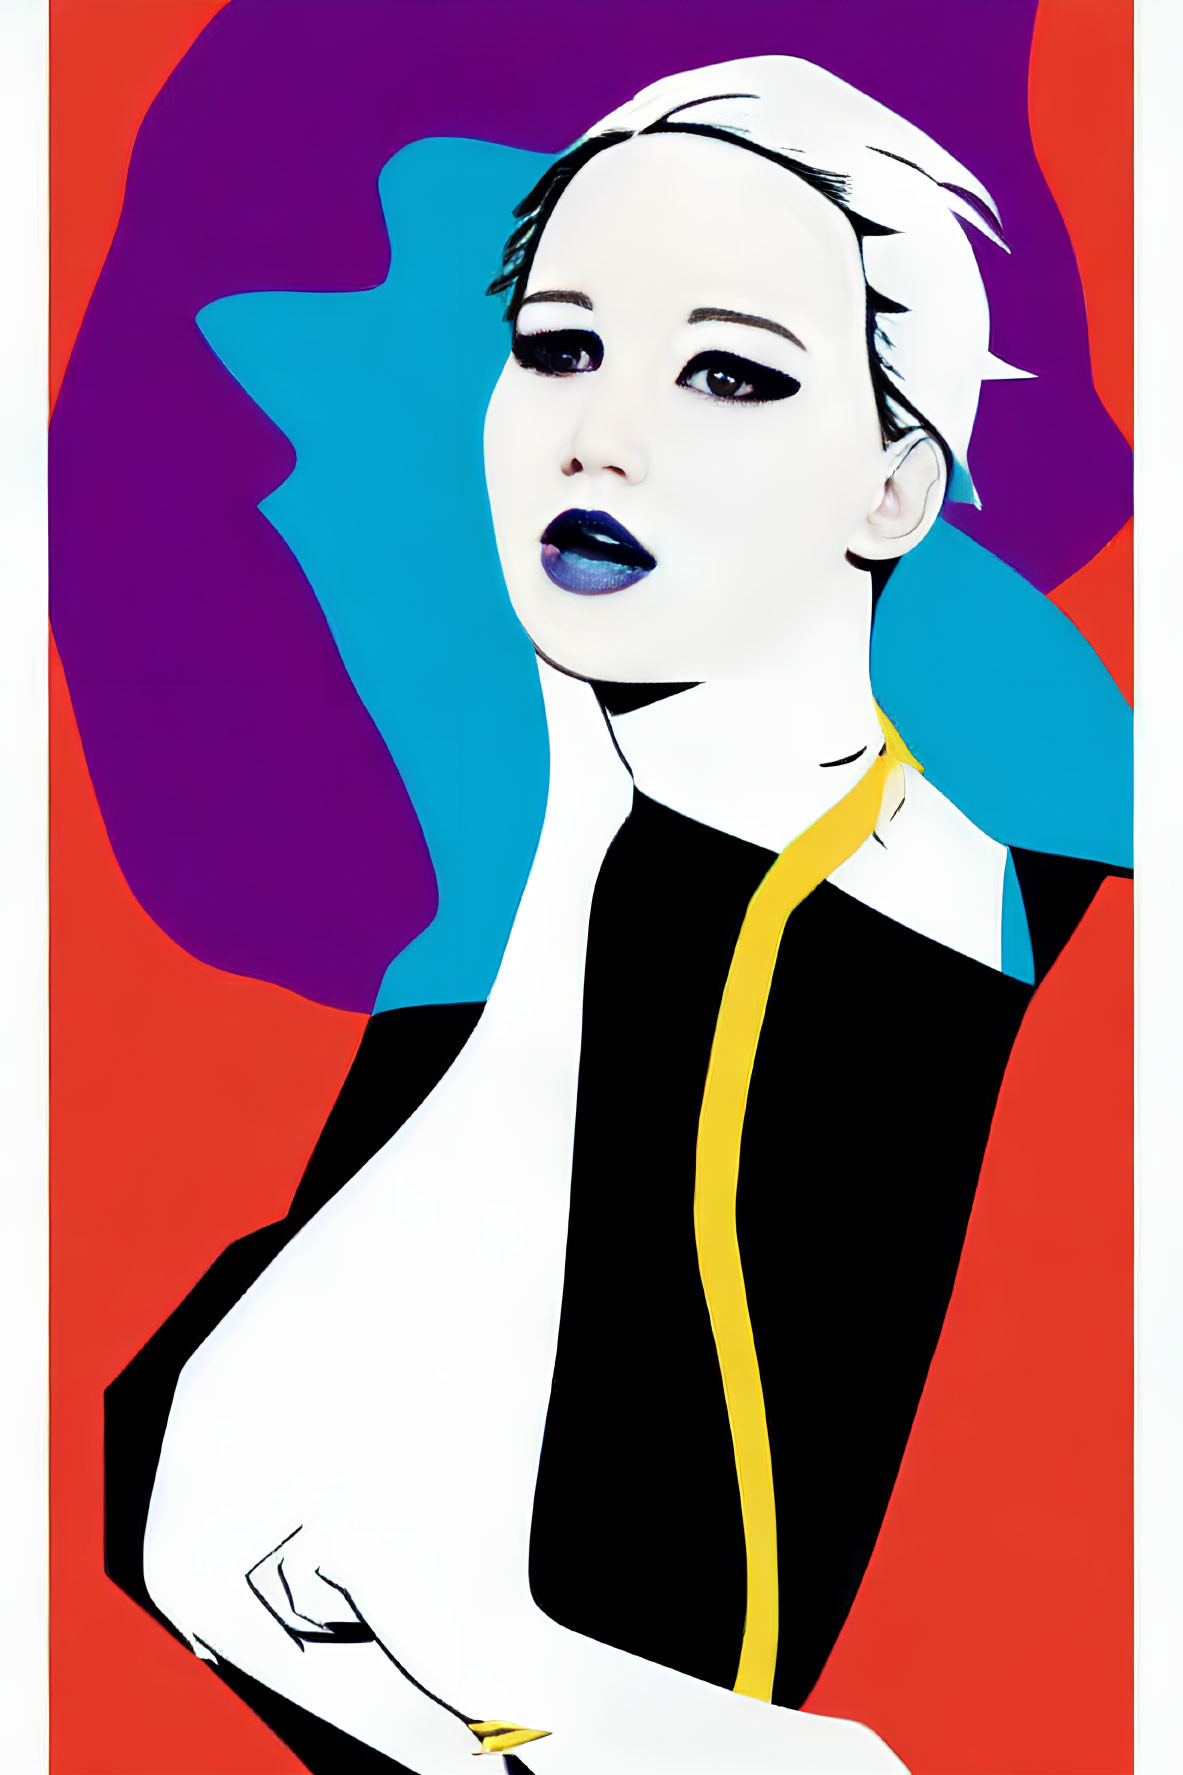 Colorful Pop Art Portrait of Woman with White Hair and Blue Lips